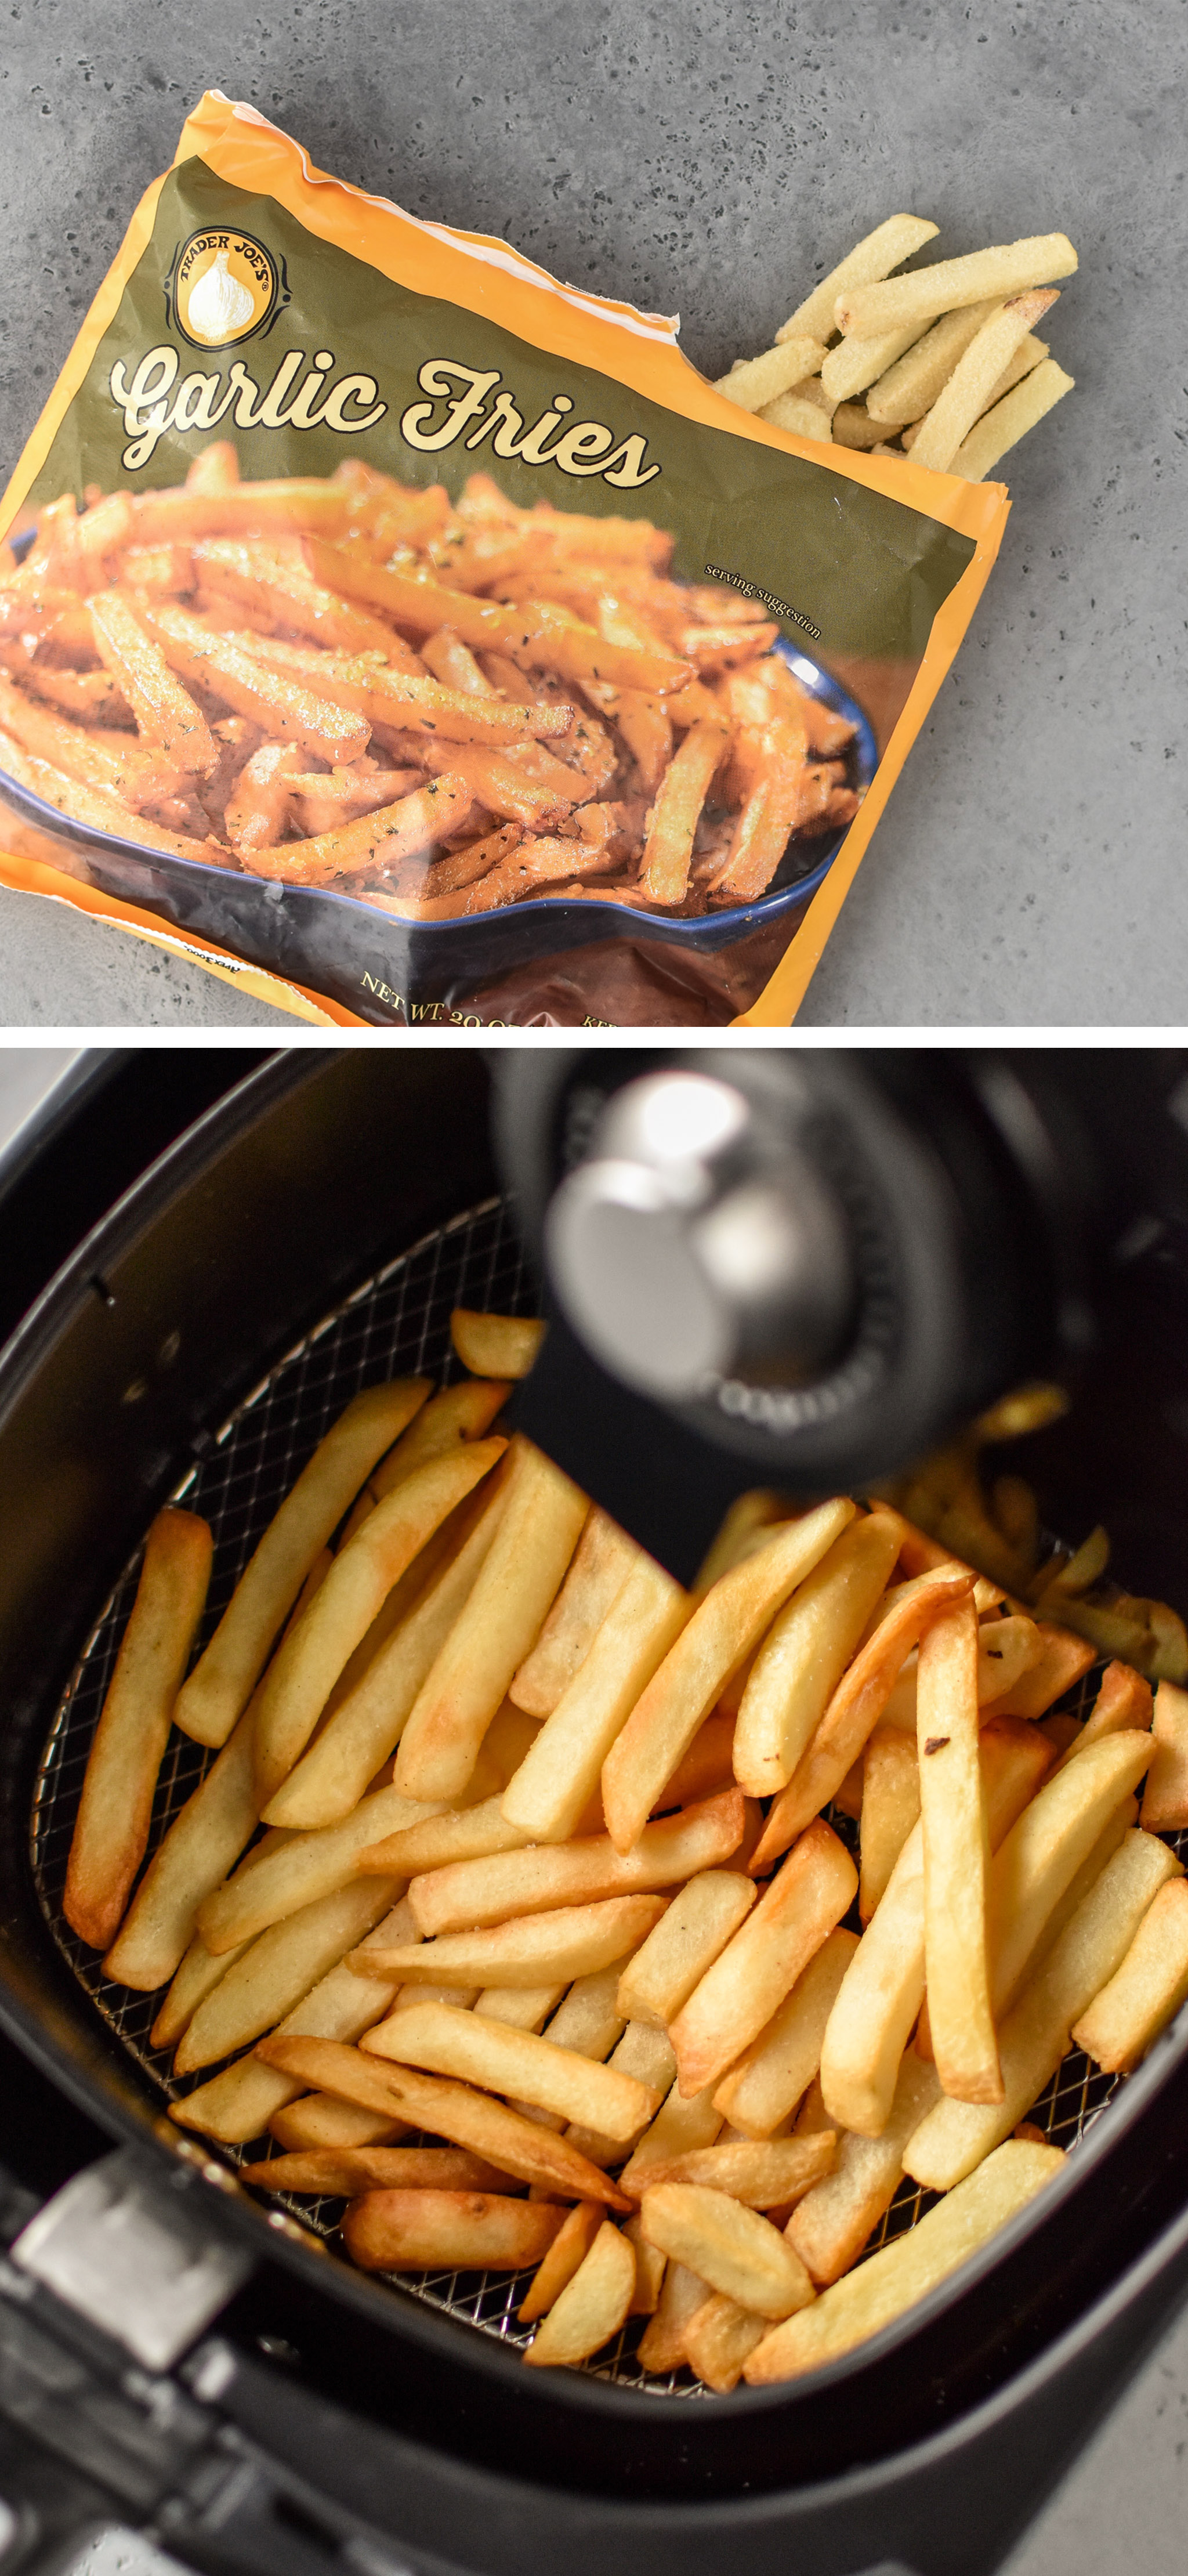 Garlic fries from trader Joe's made in the air fryer!